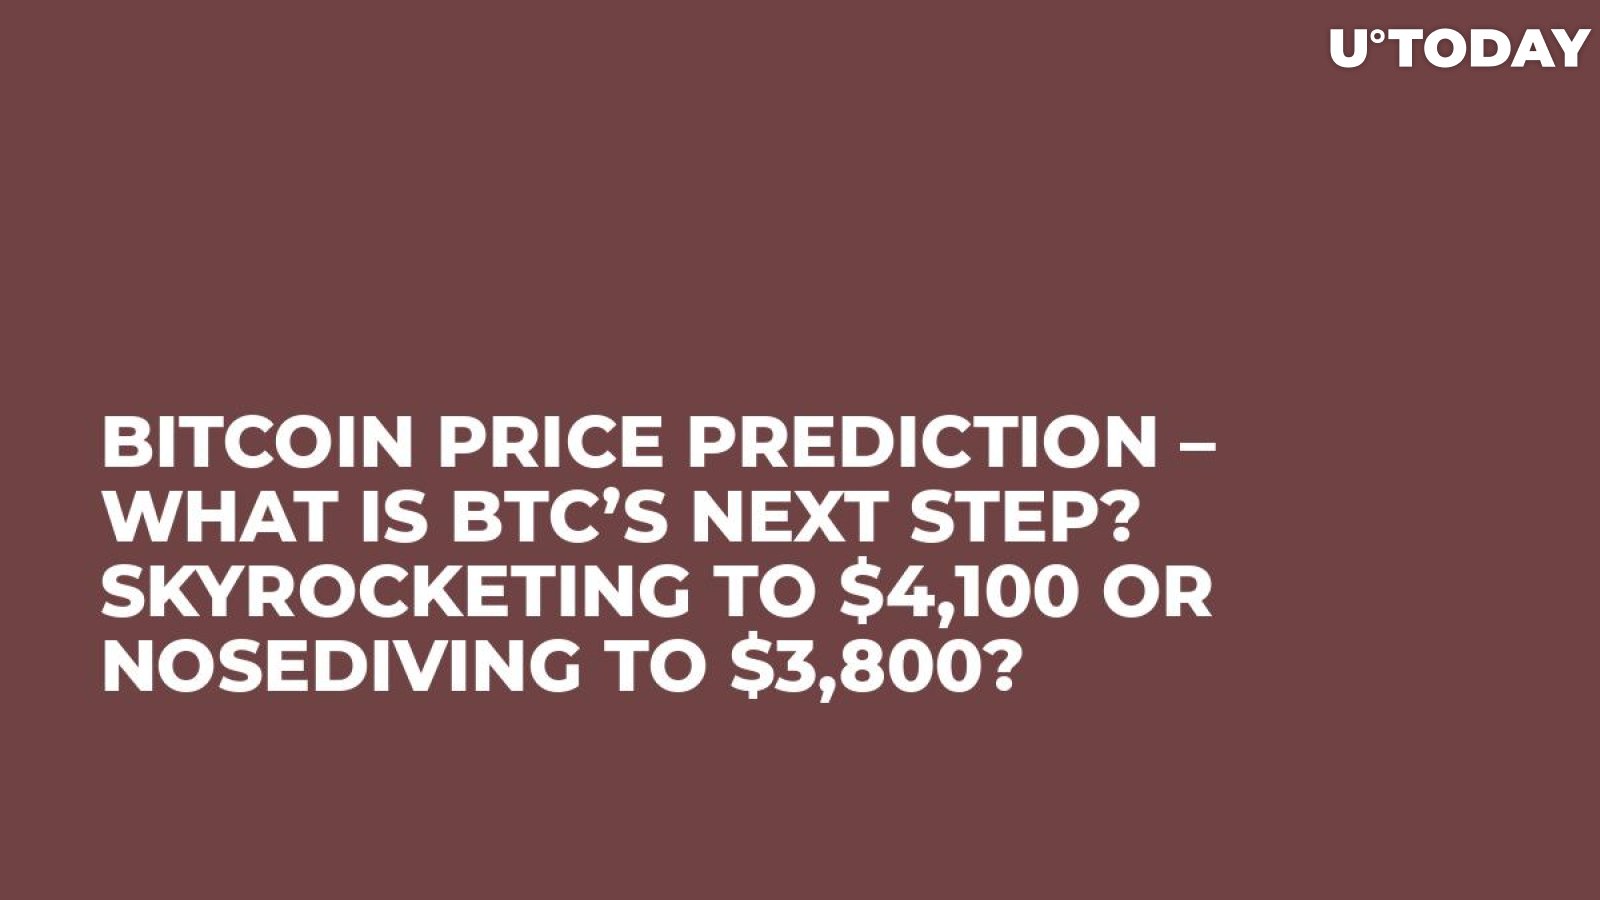 Bitcoin Price Prediction – What Is BTC’s Next Step? Skyrocketing to $4,100 or Nosediving to $3,800? 